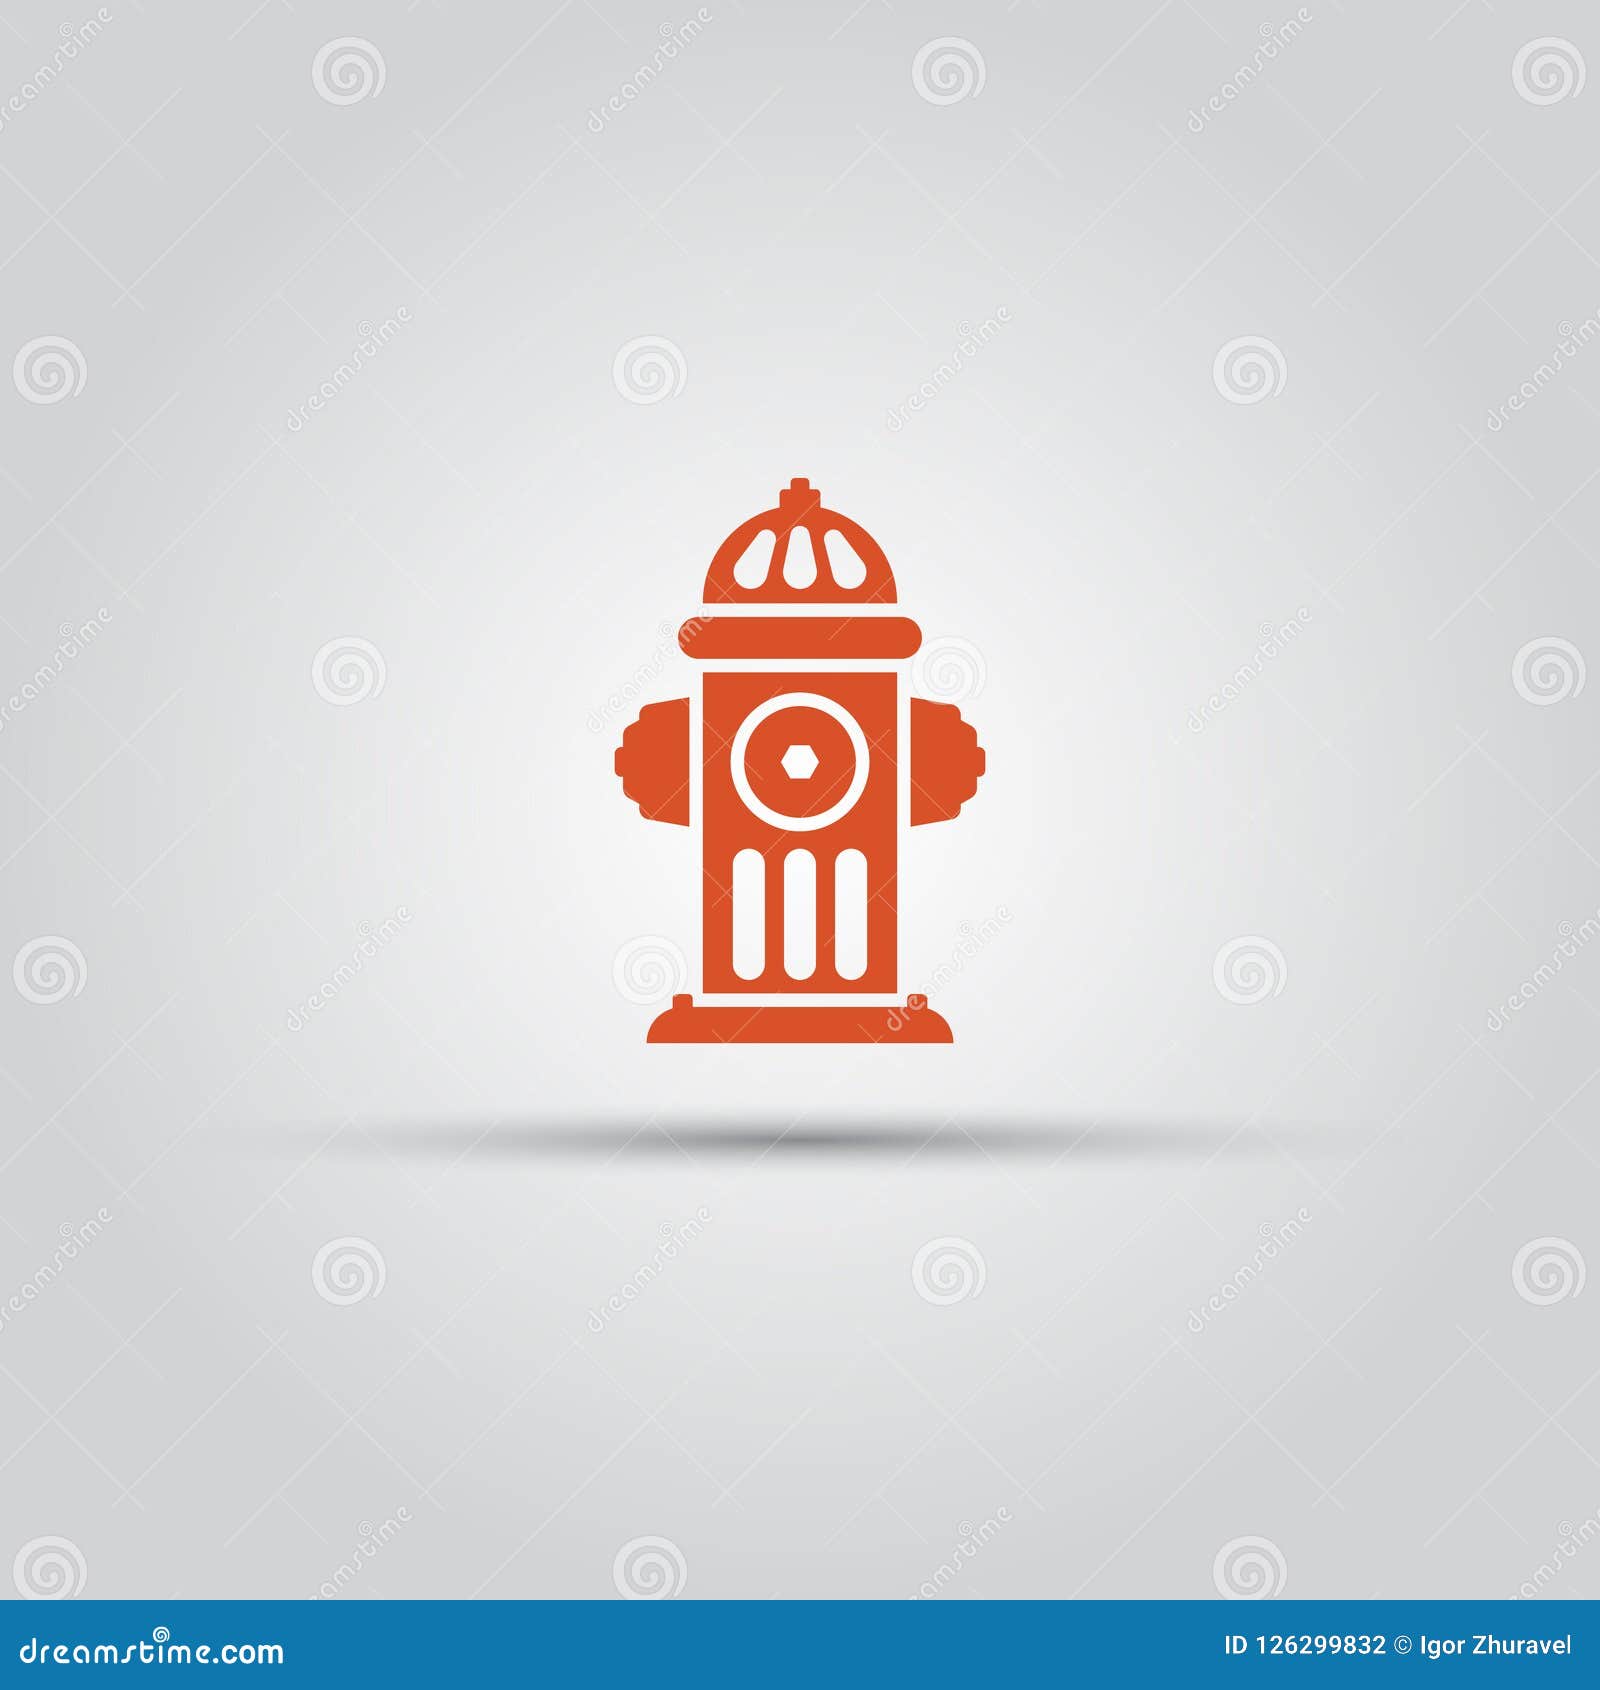 red fire hydrant   colored icon